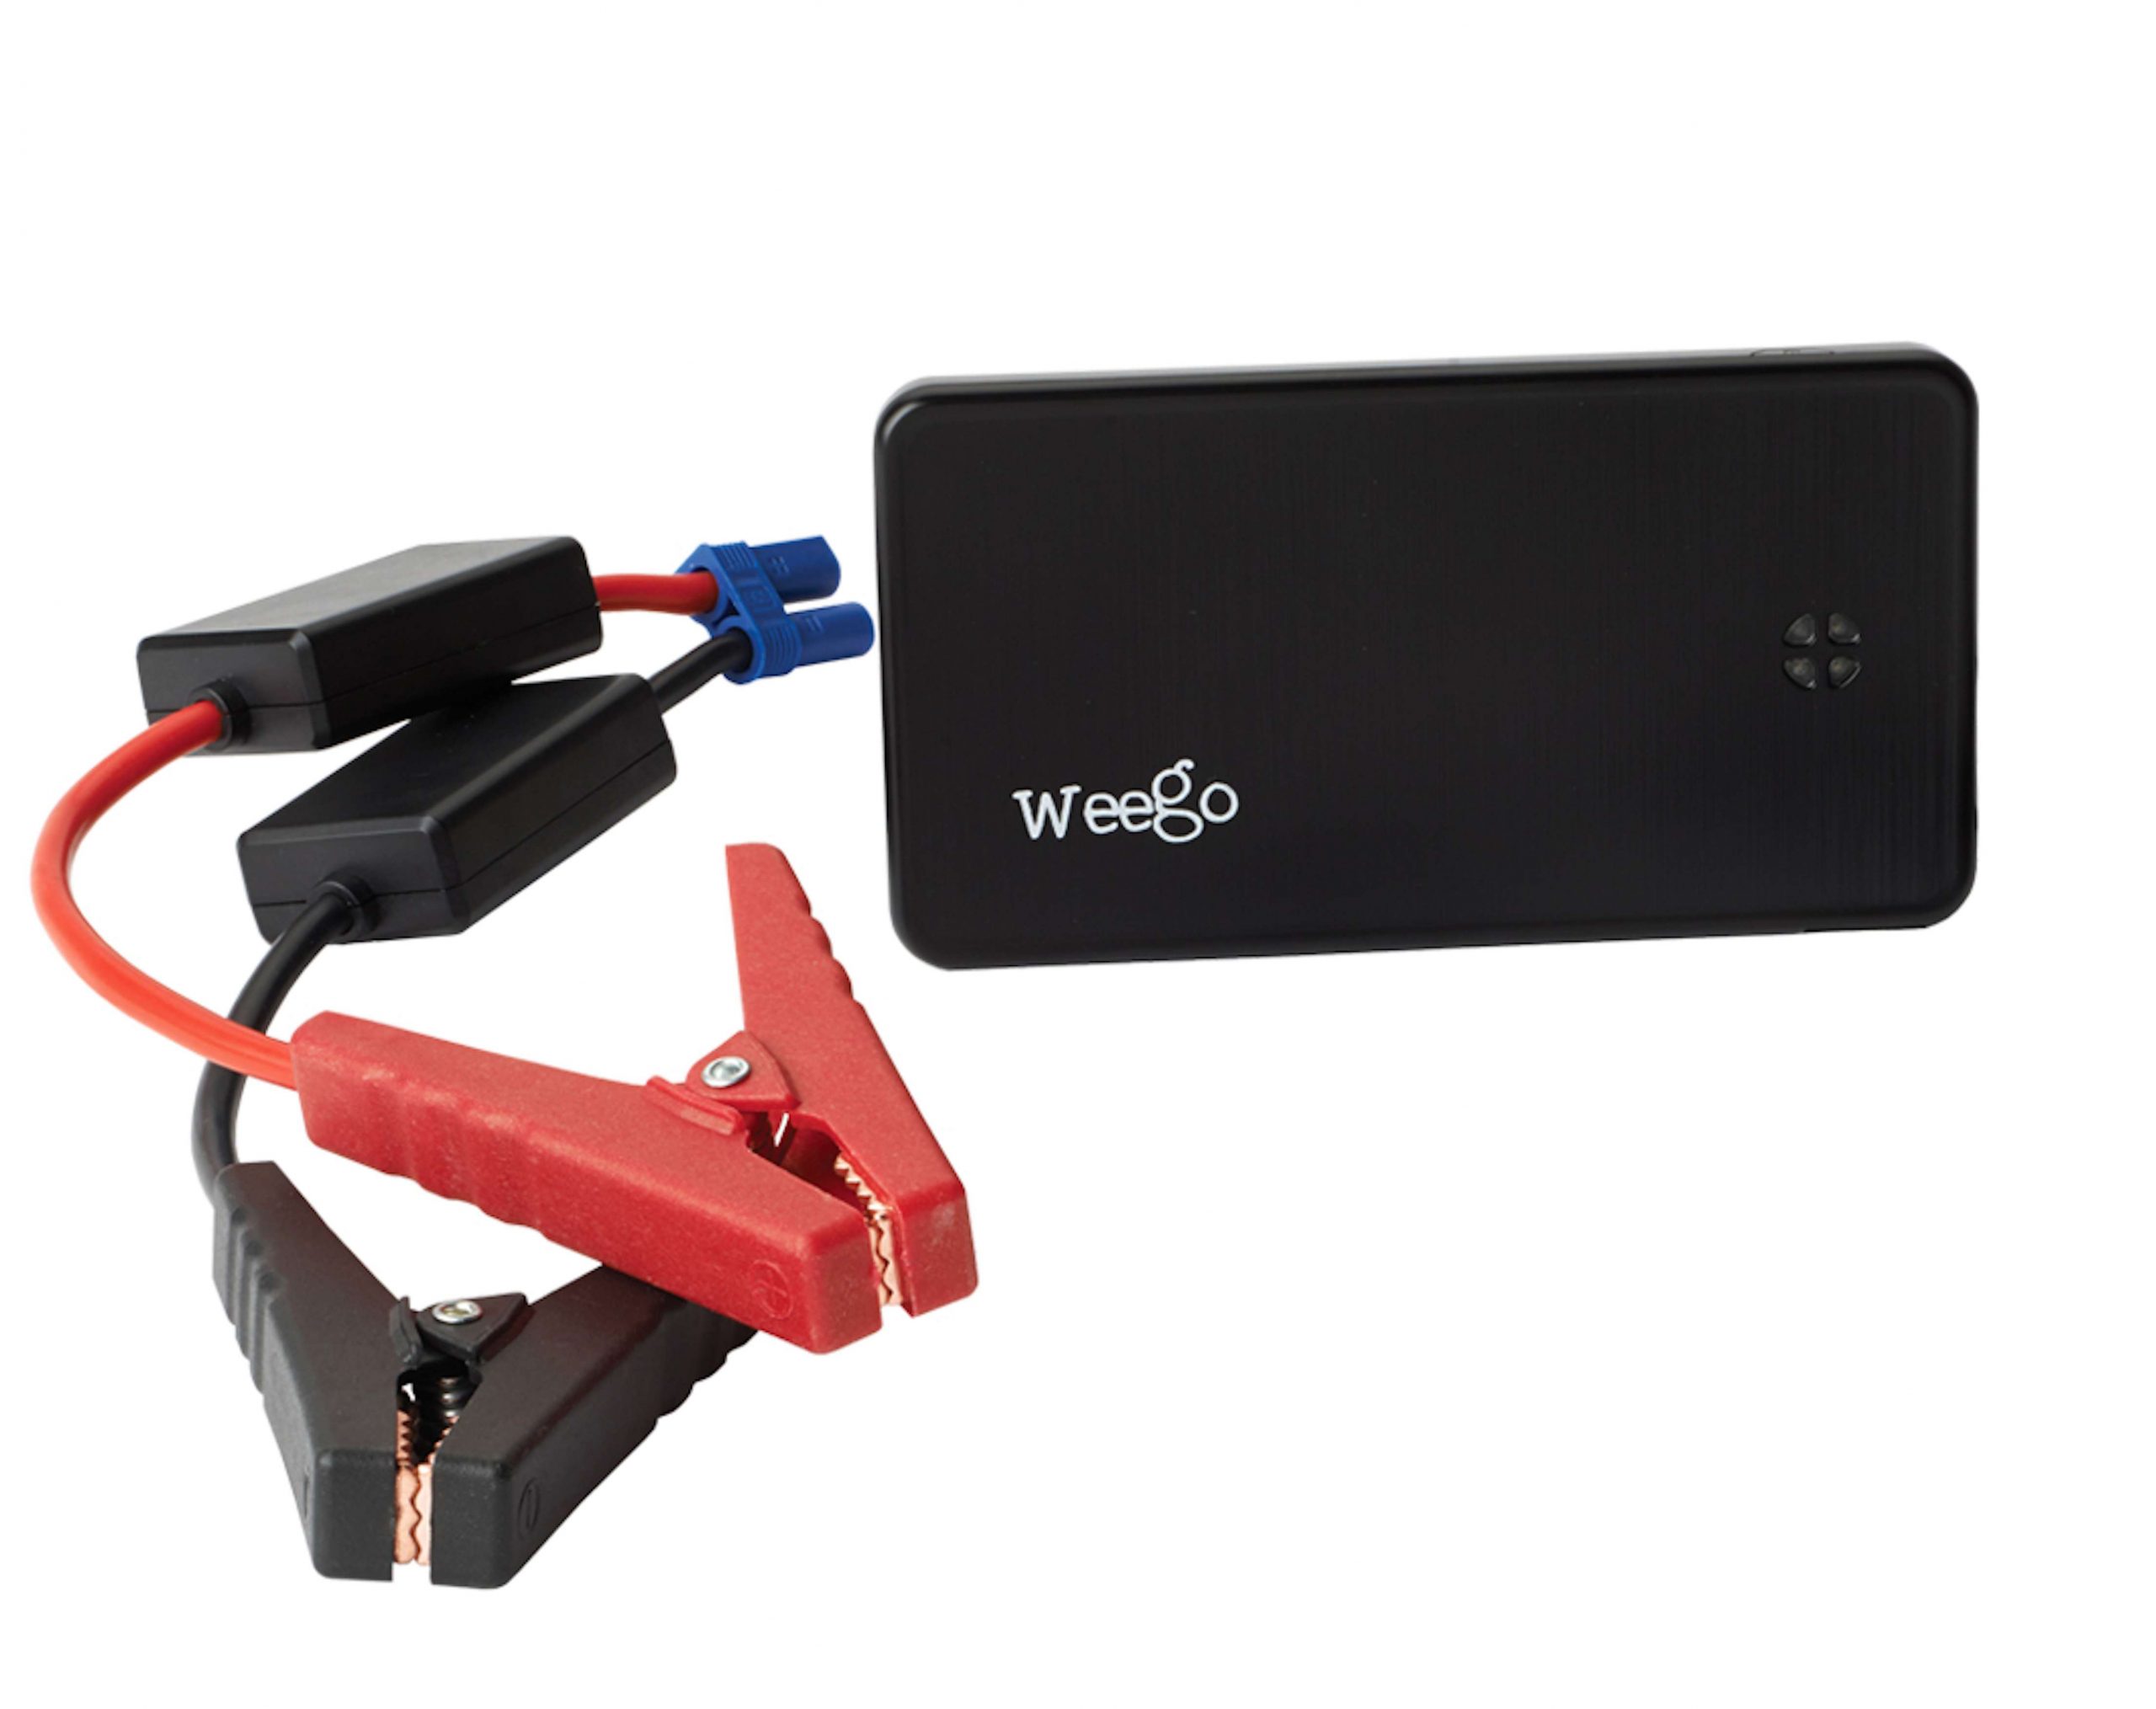 <b>Weego</b><br>	Jump Starter Battery+<br>	The Weego Jump Starter Battery+ is a pocket-sized unit capable of jump starting boats, cars, trucks, motorcycles and ATVs, as well as charging phones, tablets and other USB devices. Weego Jump Starters include all cables with instructions and are offered in three sizes: JS6, JS12 and JS18. The JS6 Standard is capable of starting gas engines up to 4.6 liters, diesels up to 2.4 liters and almost all outboard engines.